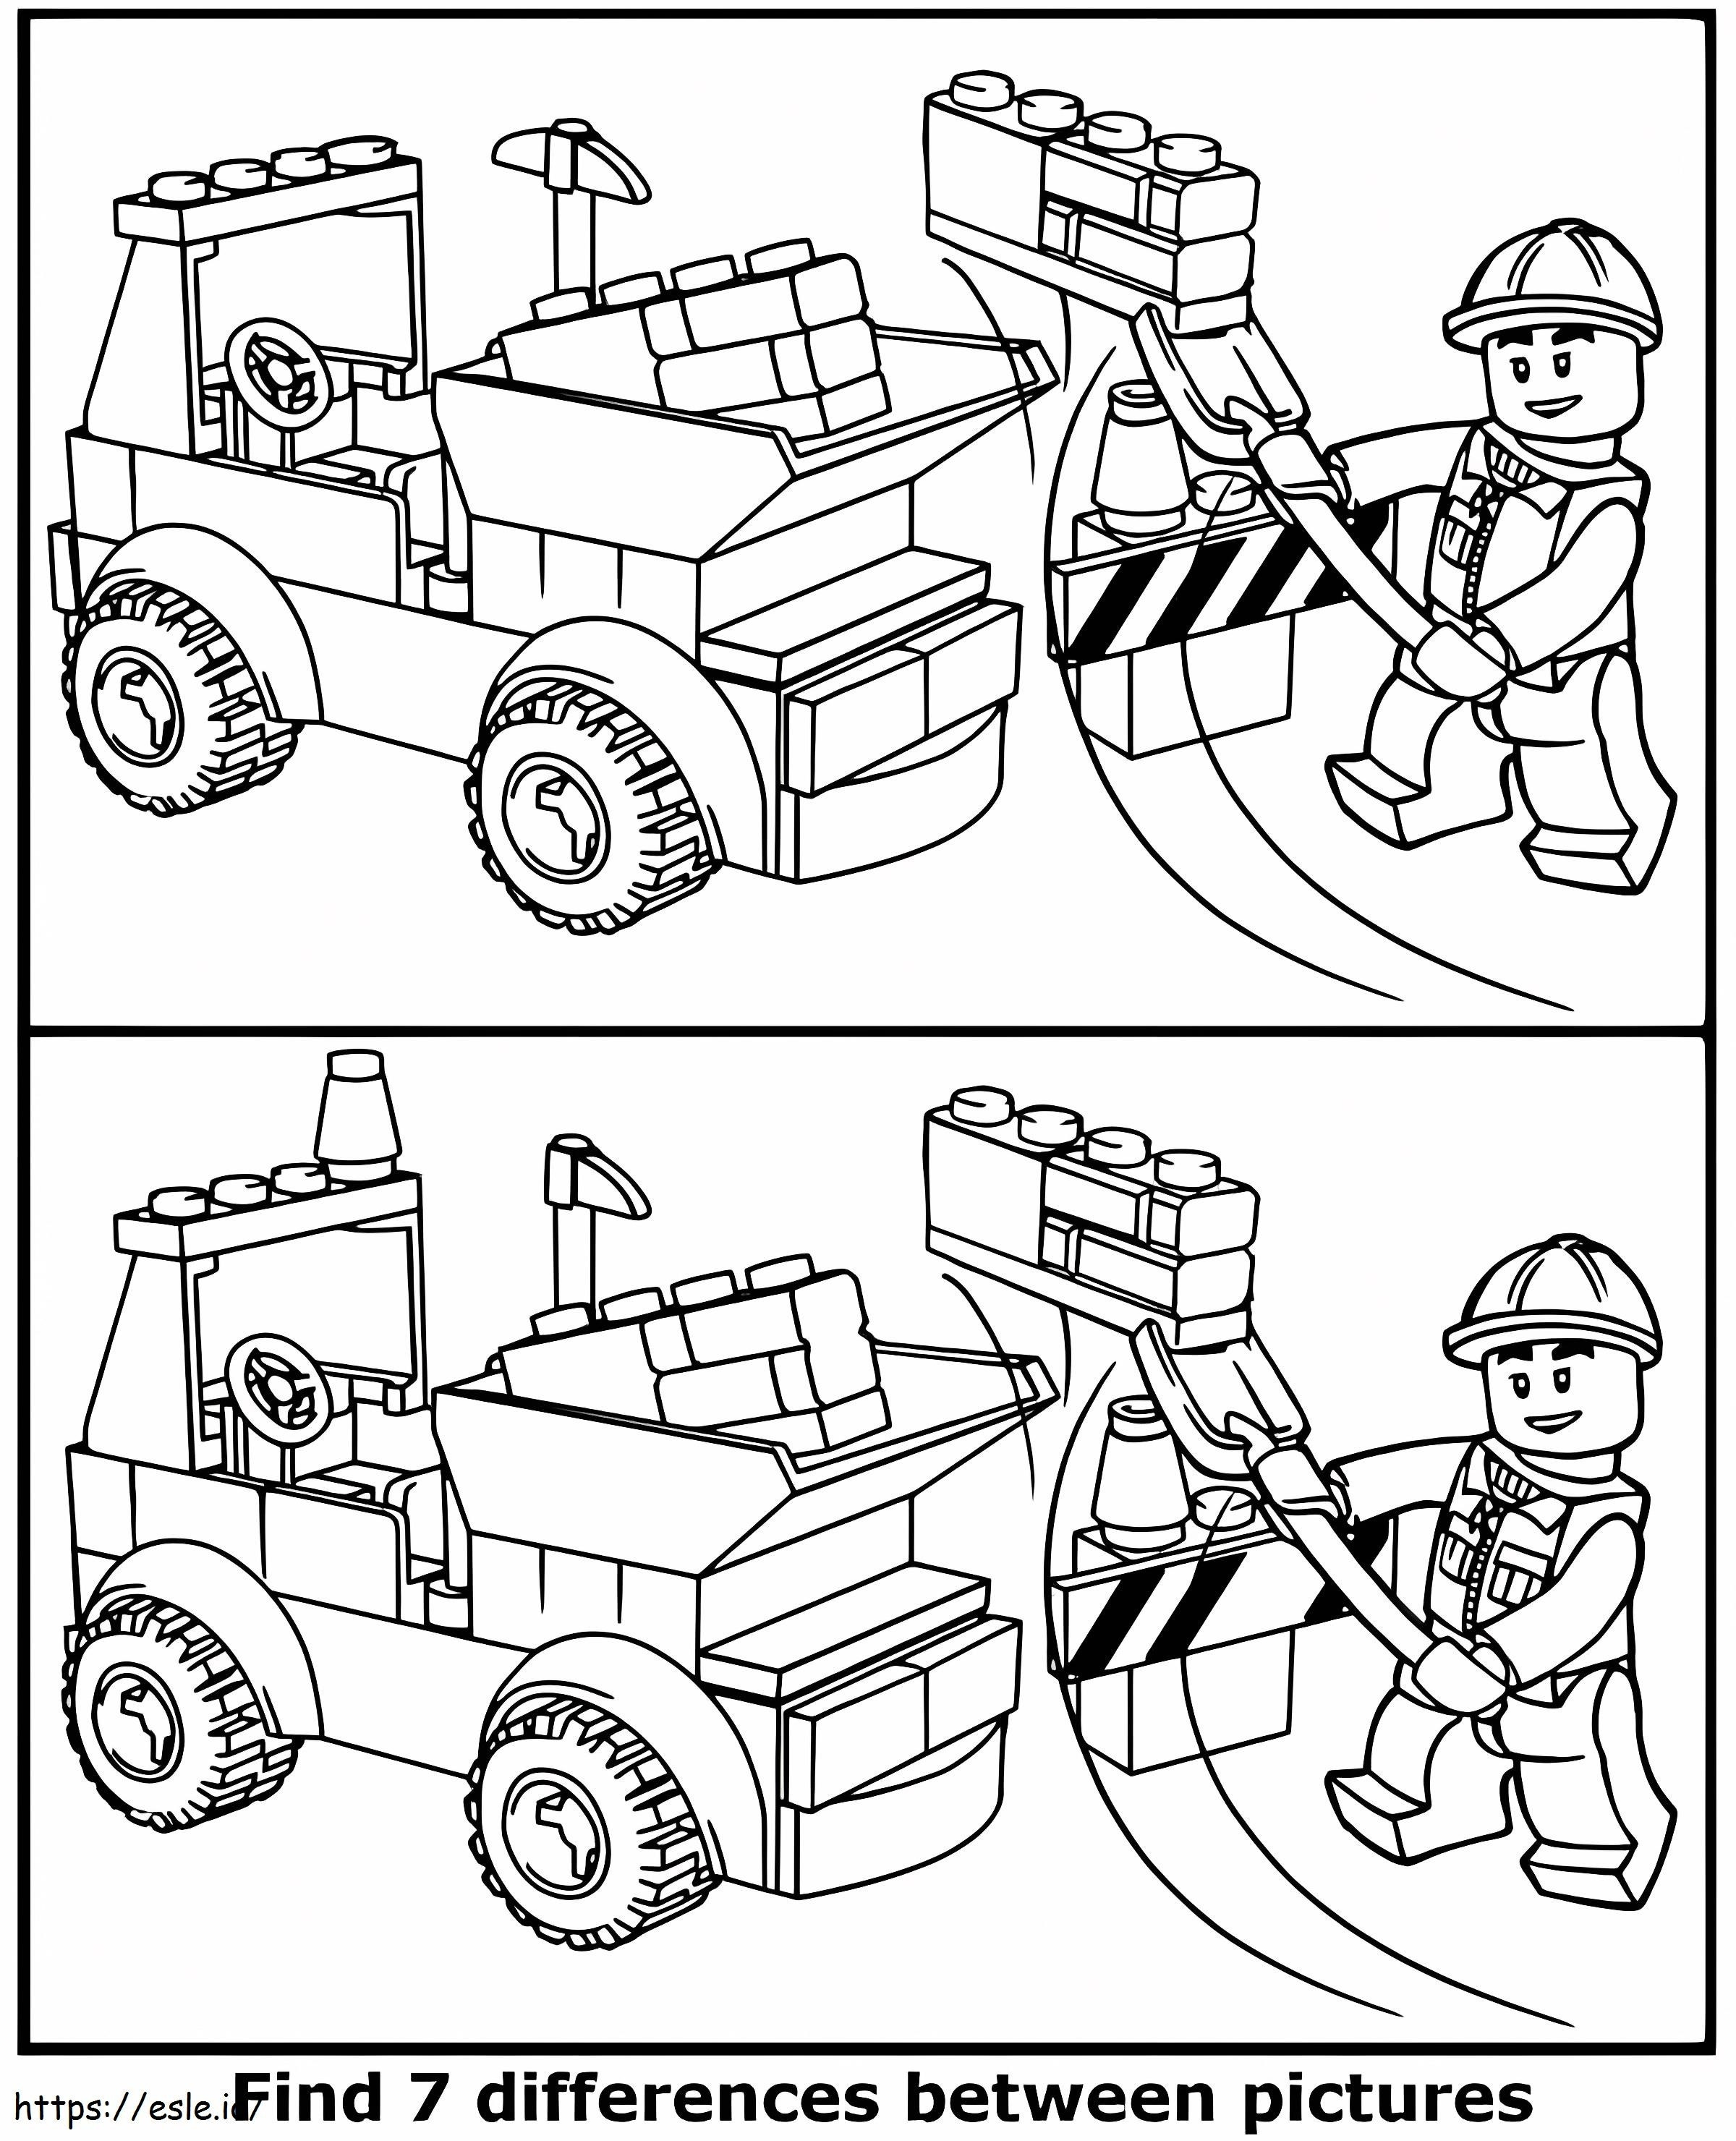 Easy To Find 7 Differences coloring page